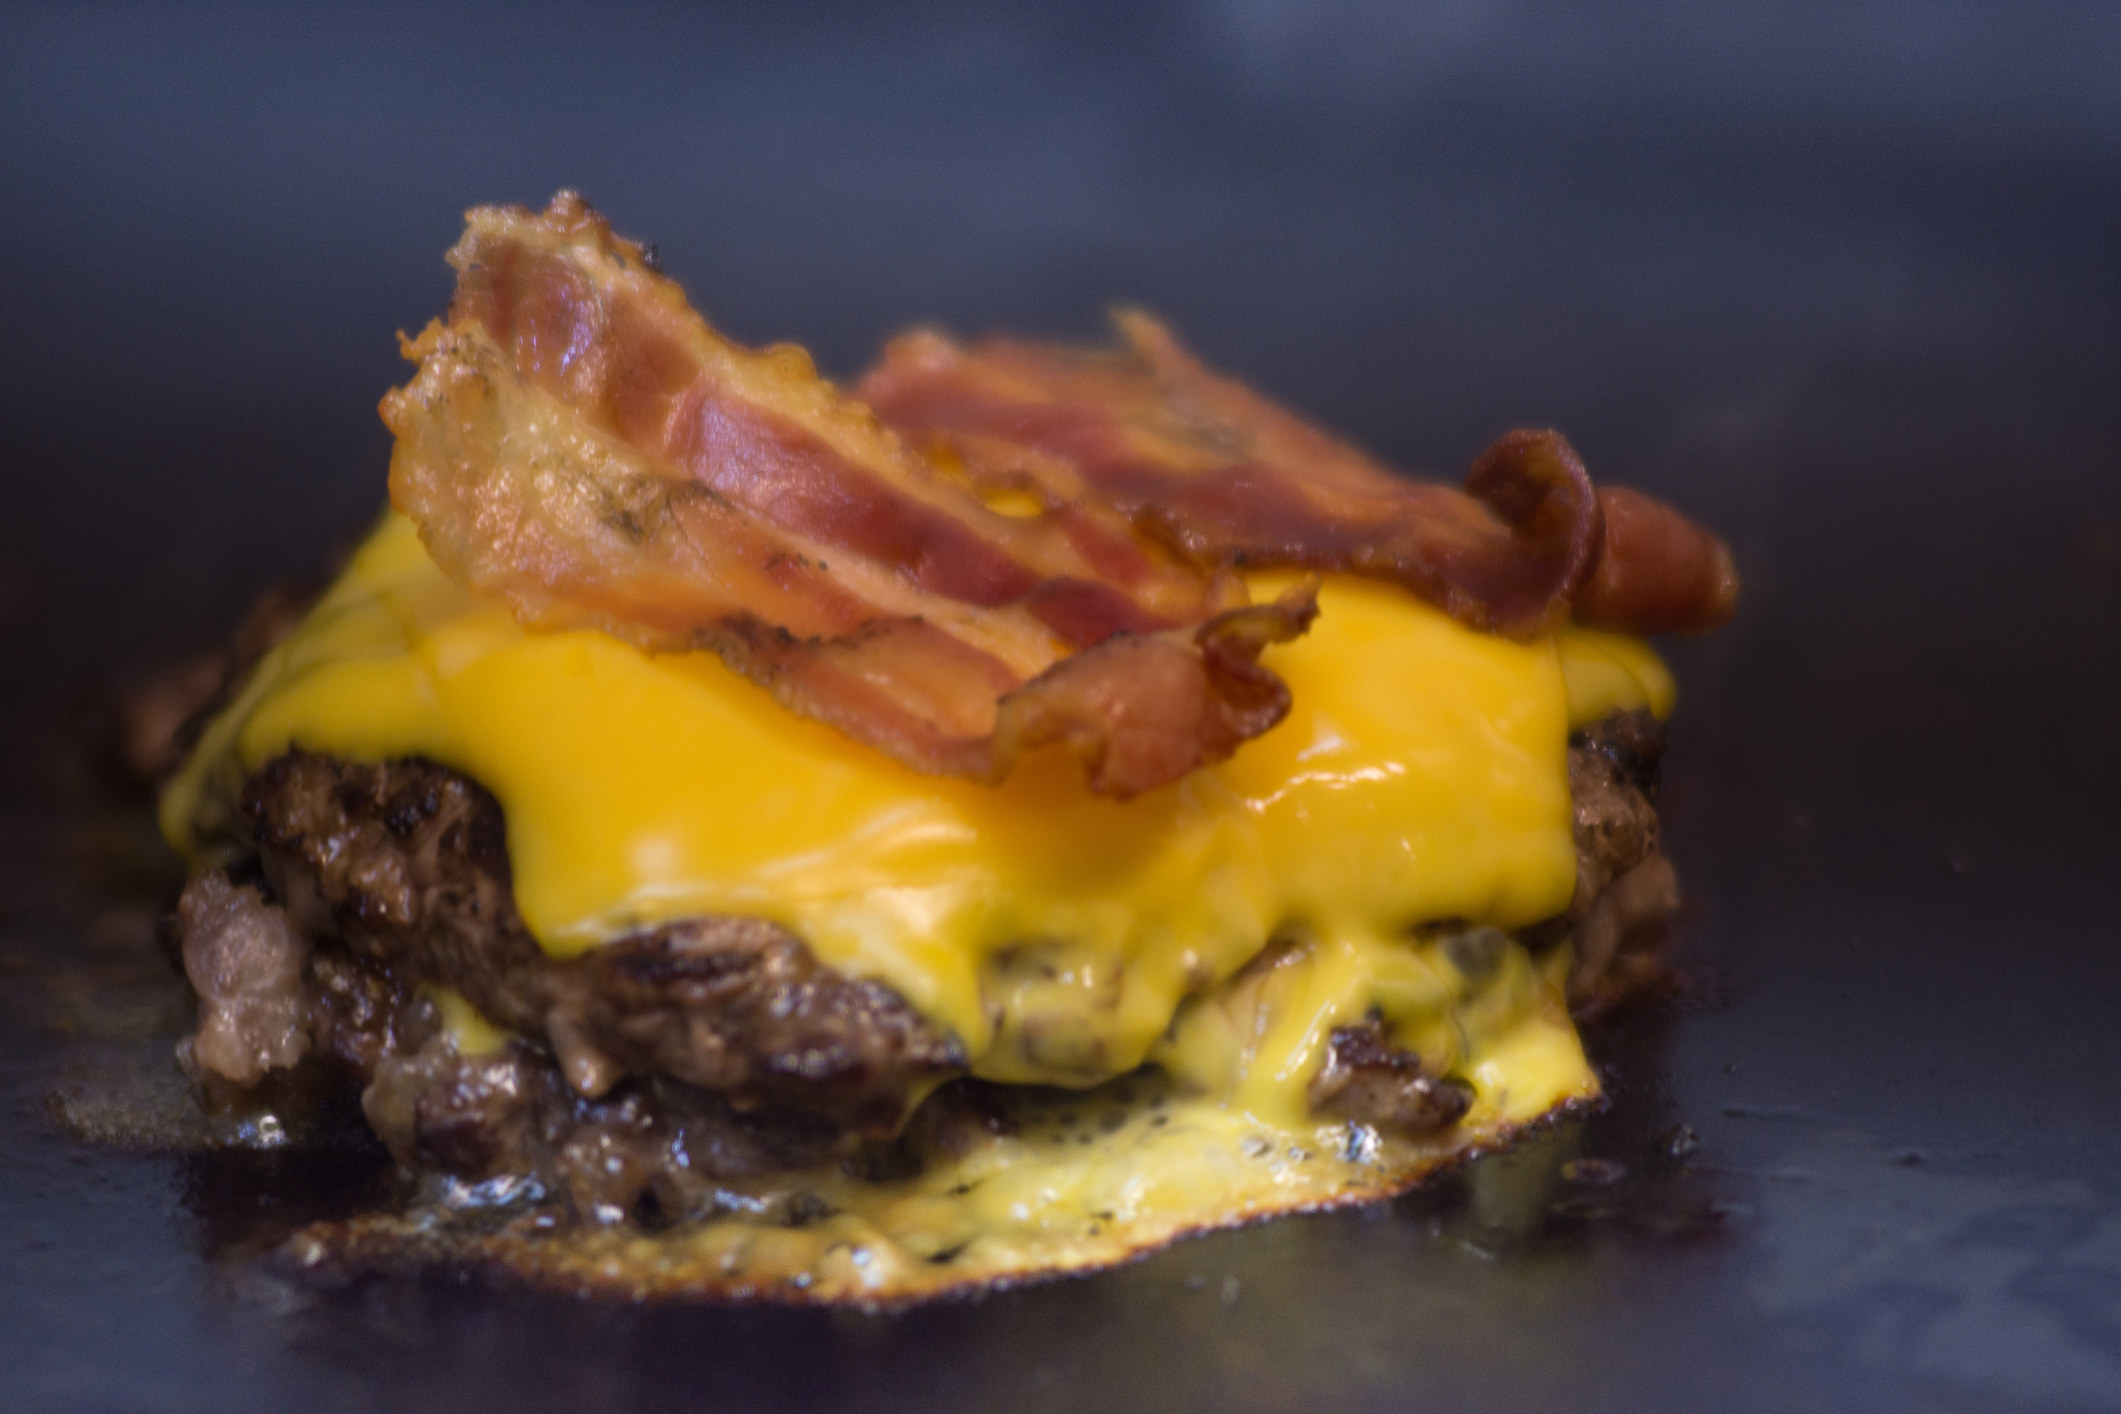 A burger patty with cheese and bacon.